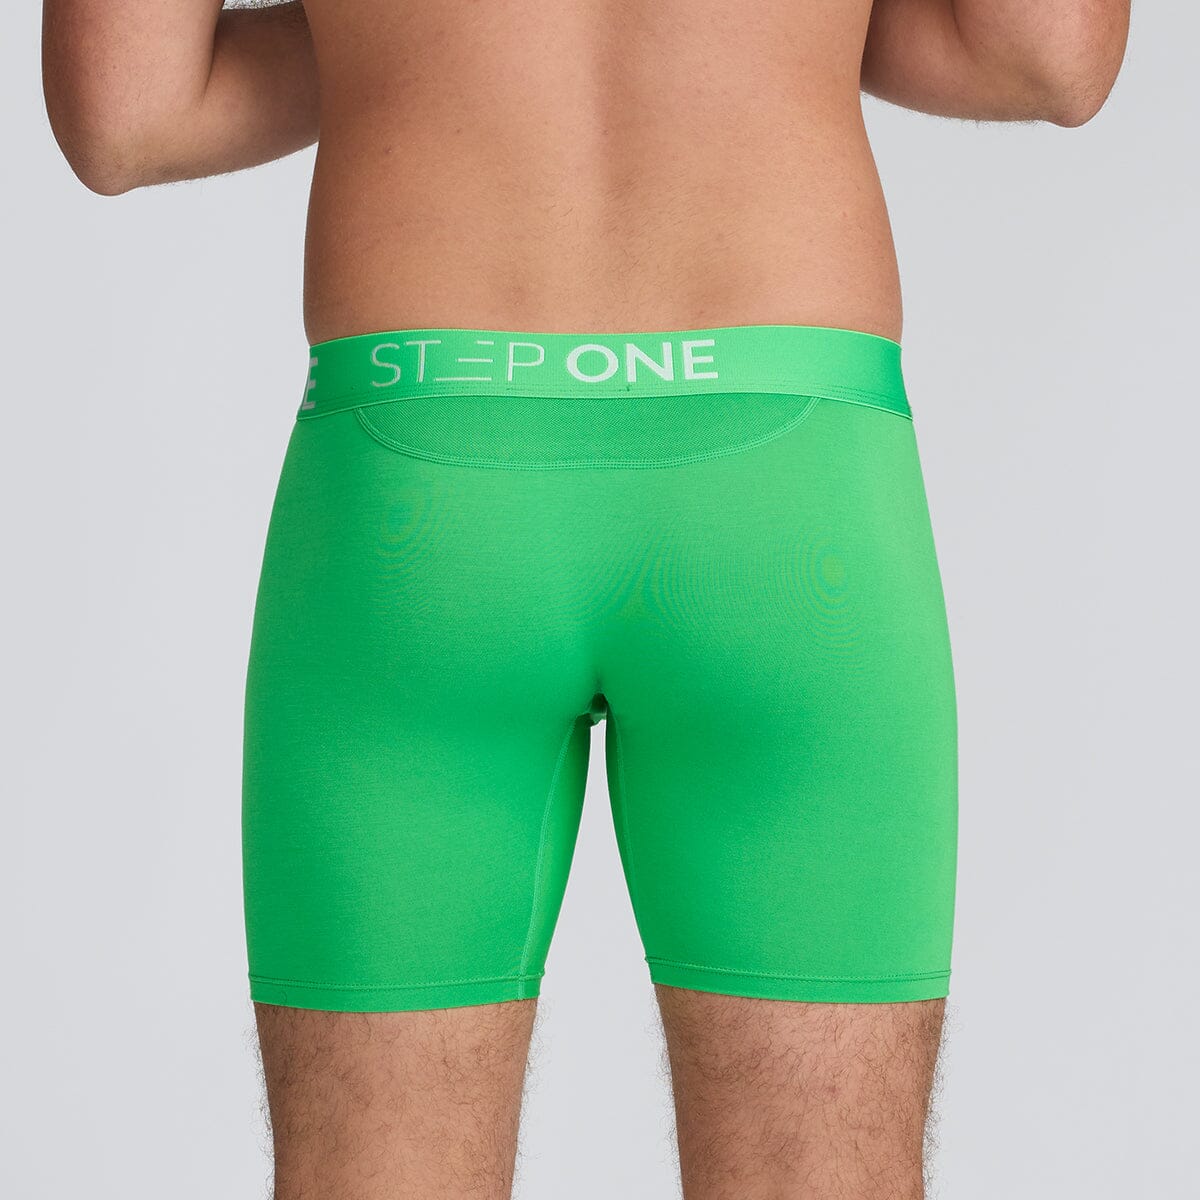 Boxer Brief Fly - Green Screens - Bamboo Underwear